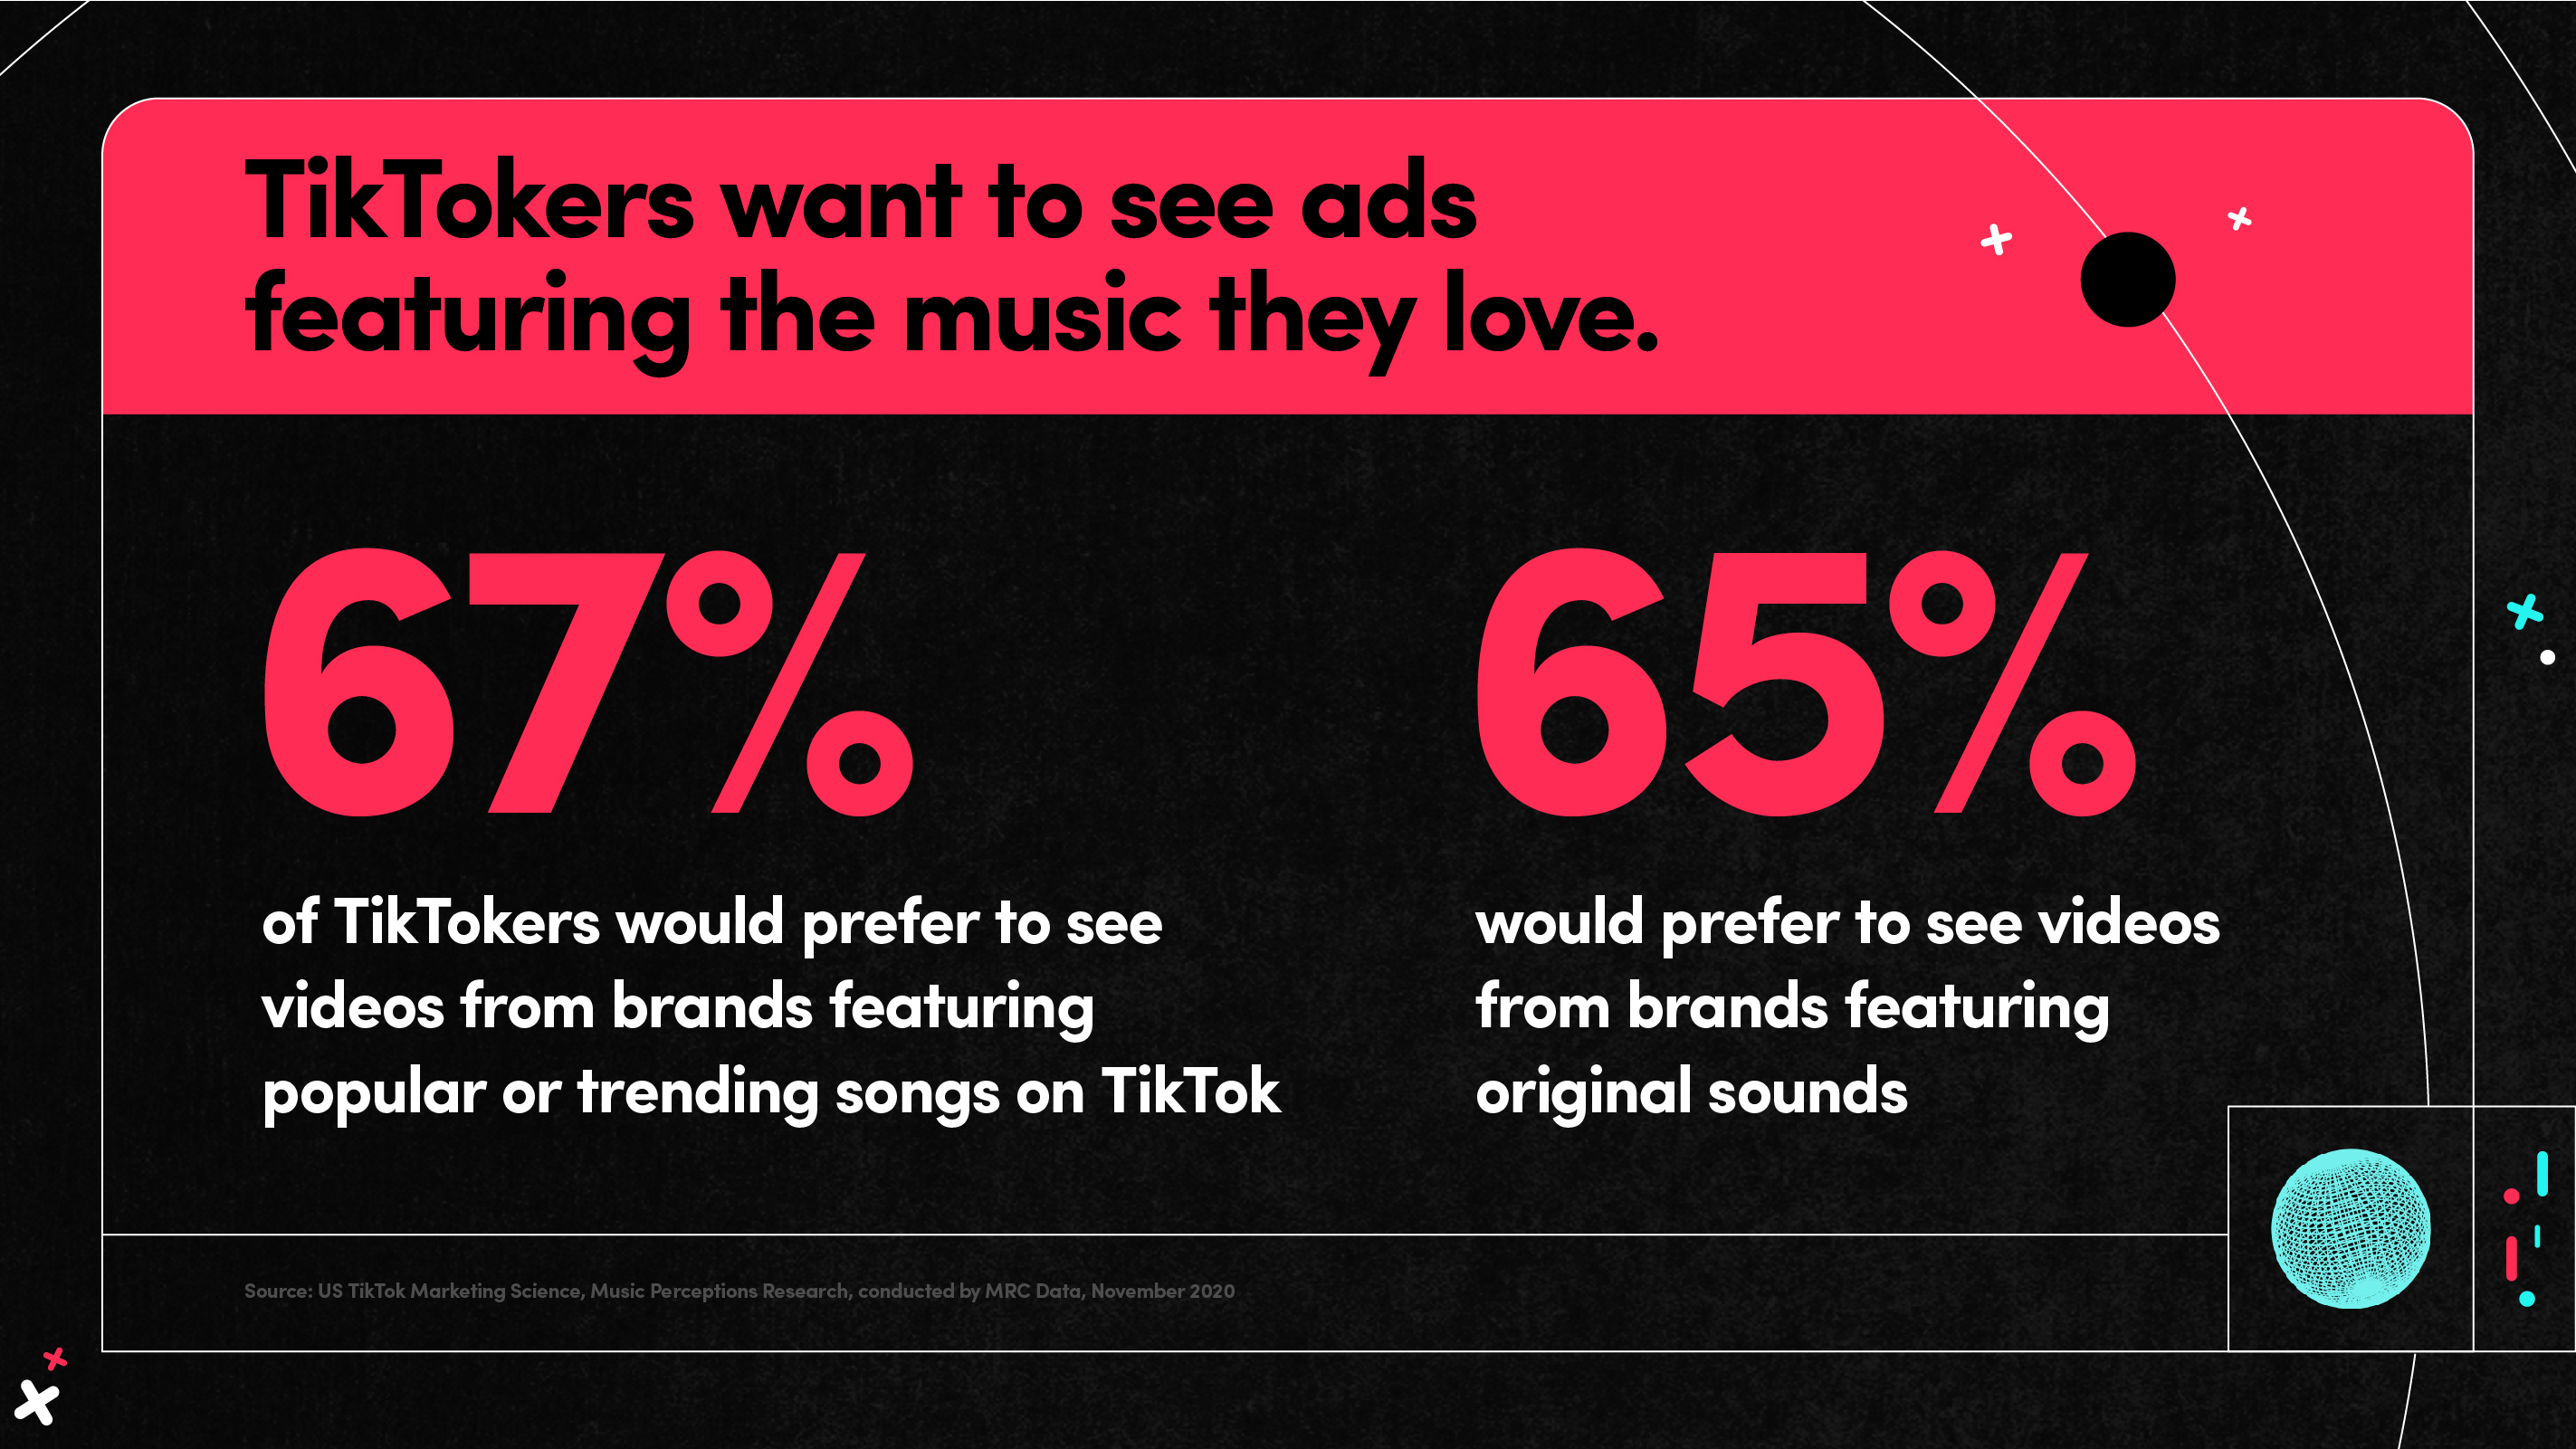 New studies quantify TikTok's growing impact on culture and music